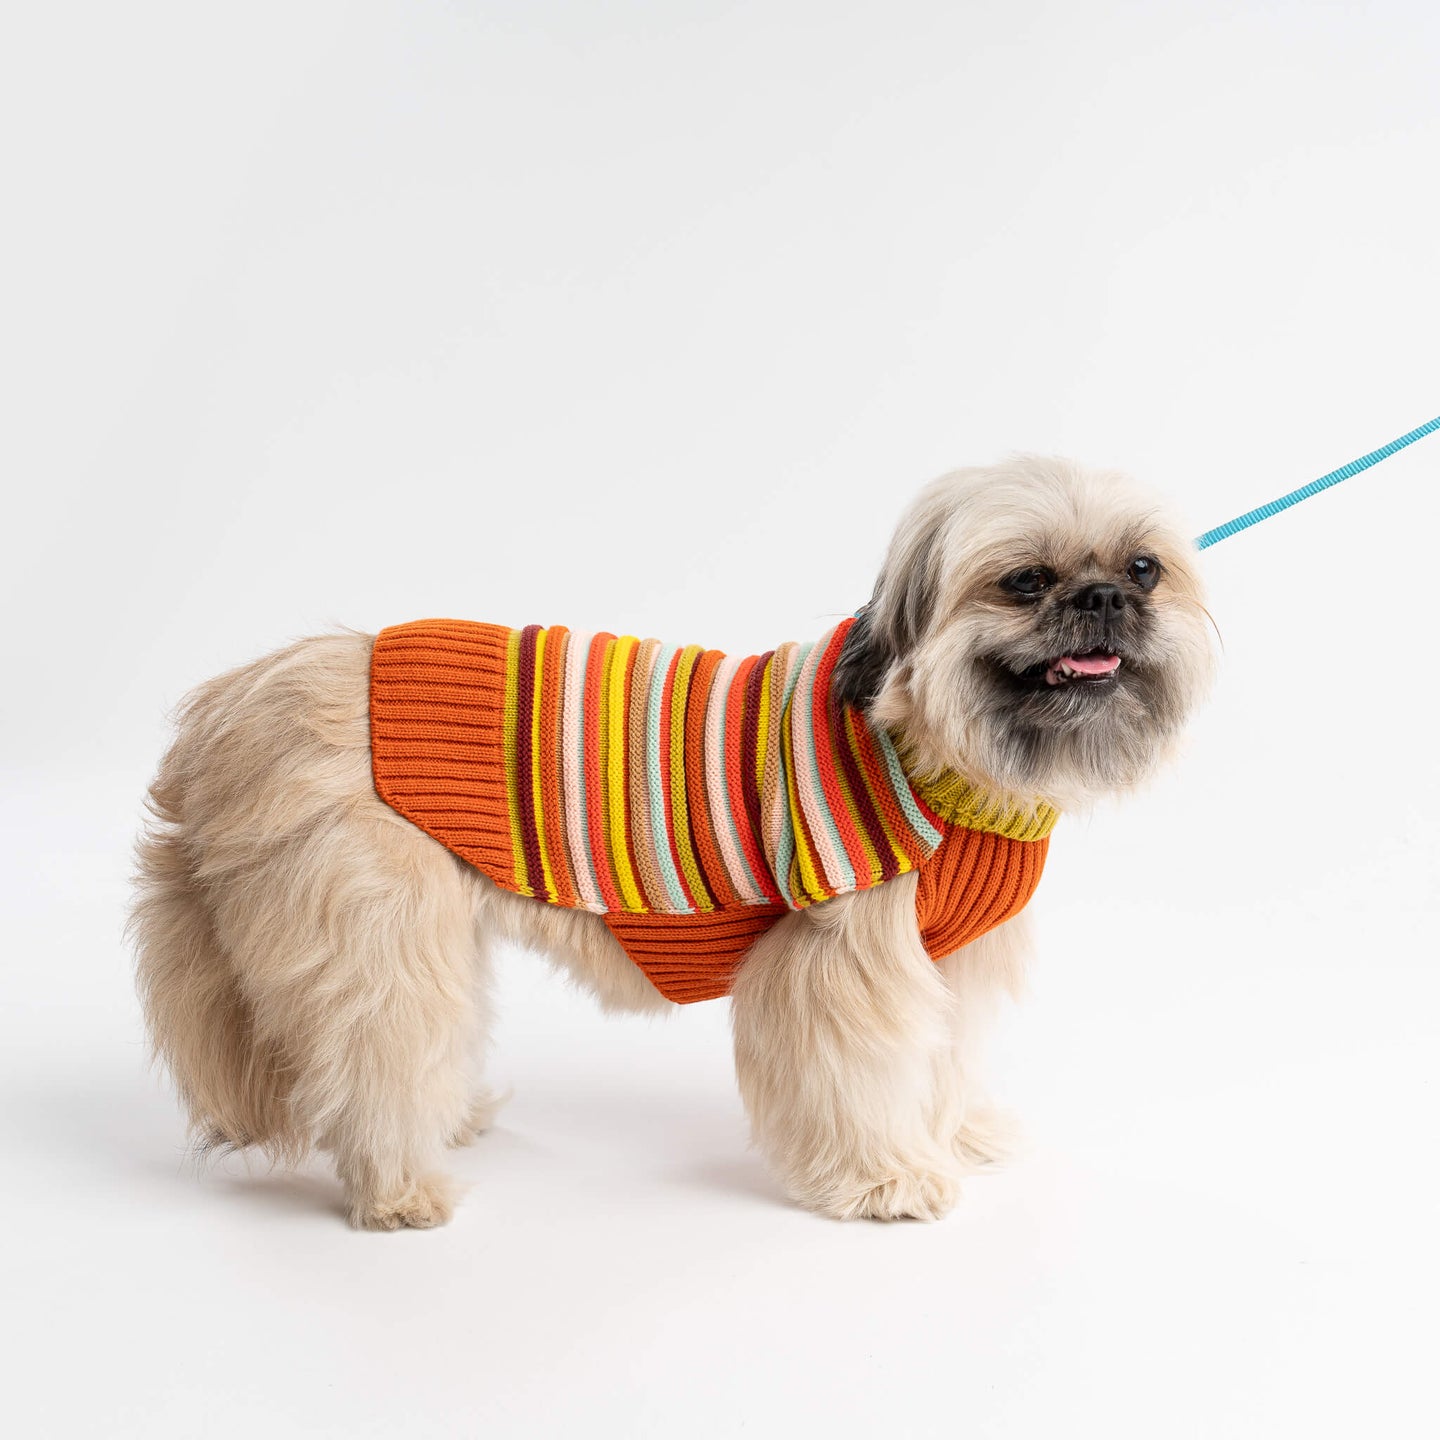 Circus Knit Texture Stripe Rib Dog Sweater Long Warm Easy to Wash